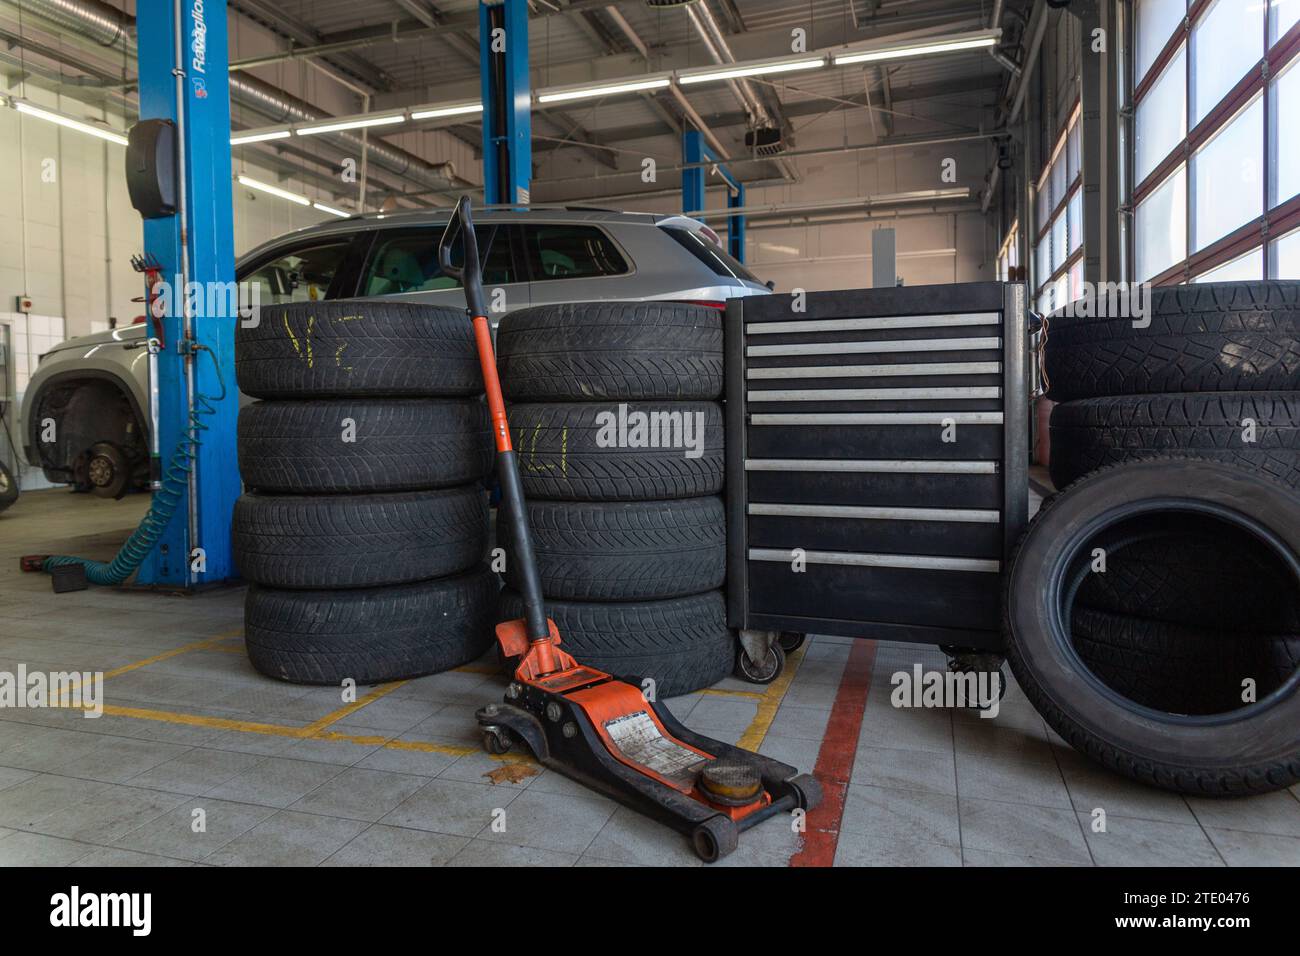 A set of tires for seasonal replacement near the lift in the tire workshop. The concept of seasonal car tire replacement. Stock Photo